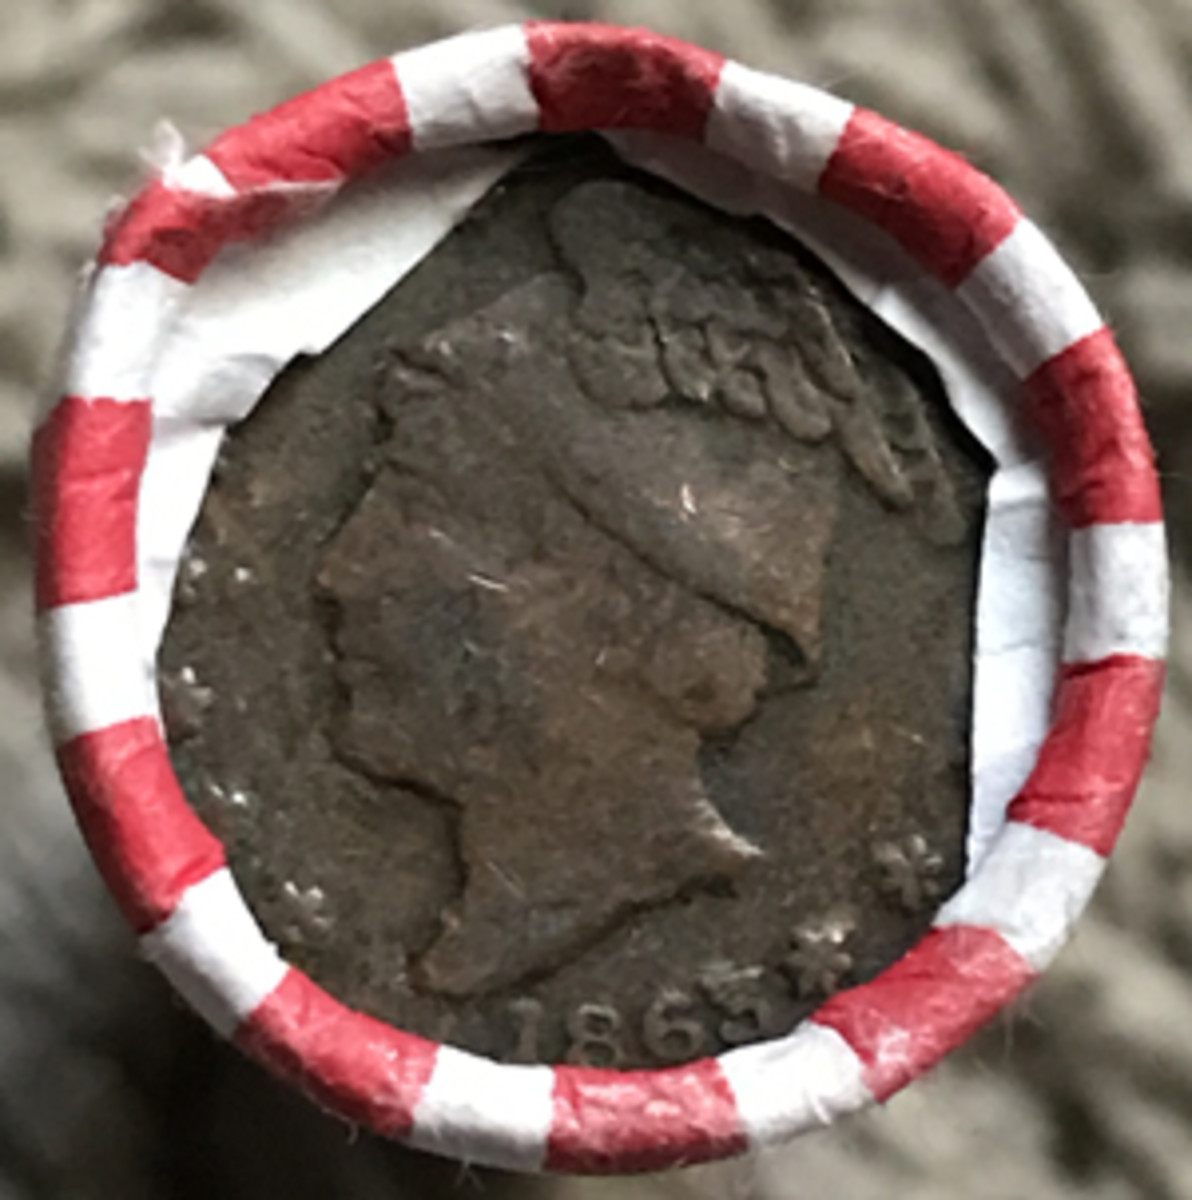  An 1863 Civil War token from Oshkosh, Wis., turned up in a bank roll of cents purchased from a bank in California.